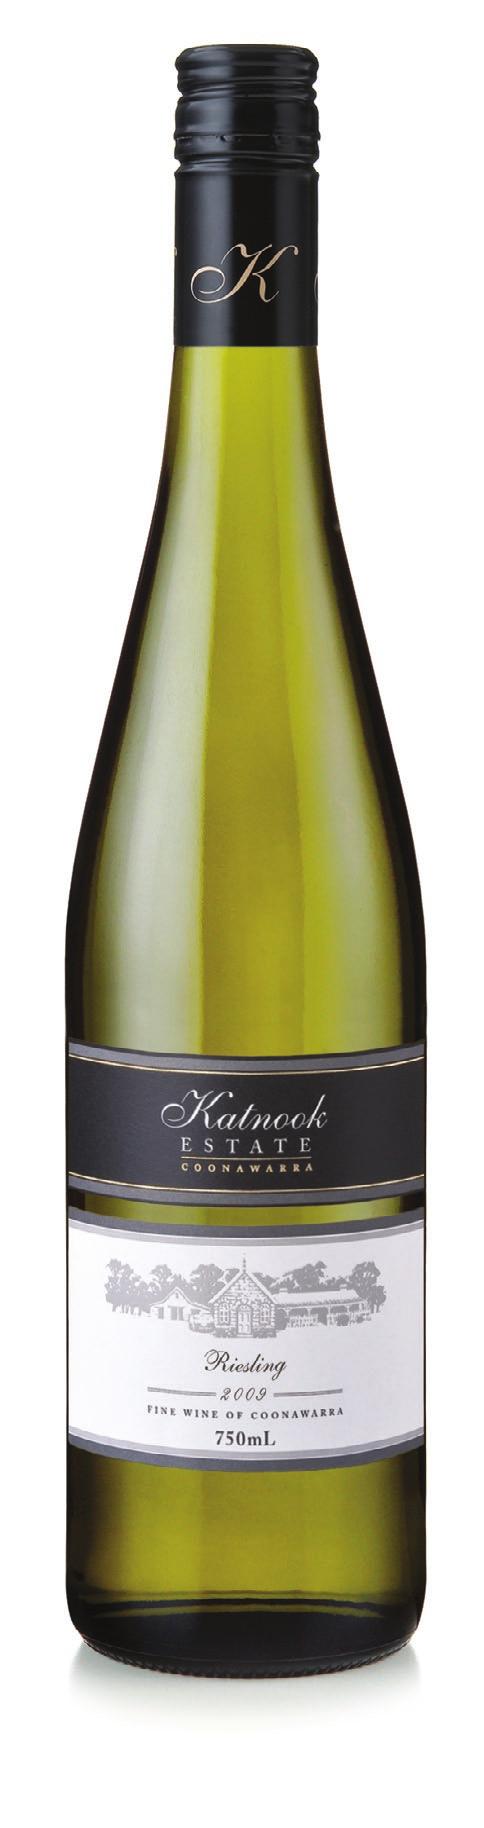 Katnook Estate Riesling 2009 The Katnook Estate range of premium quality, single varietal wines are an expression of the classic and unique characteristics of the Coonawarra wine region.